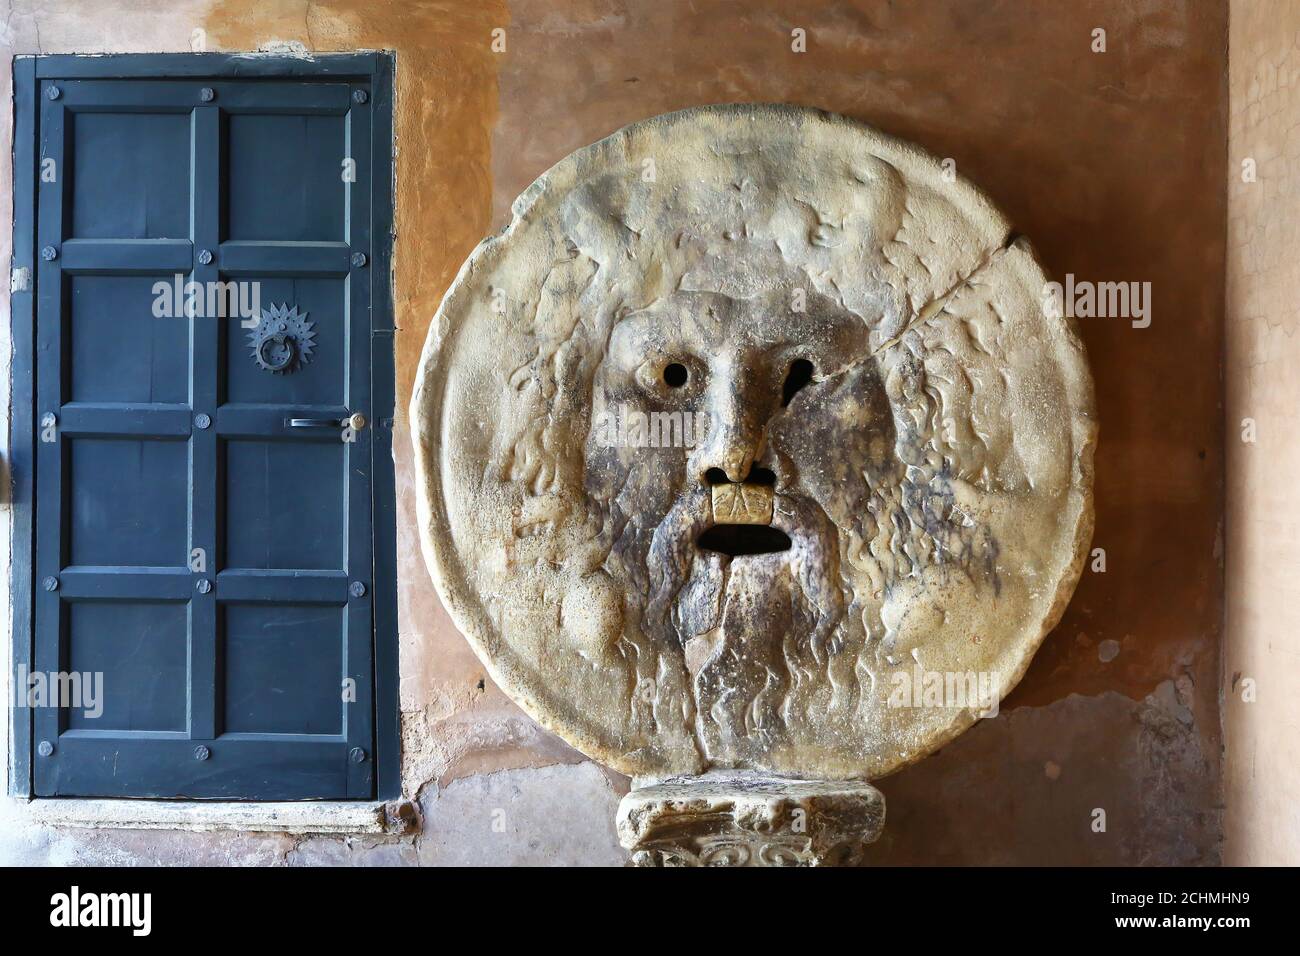 La Bocca della Verità (the mouth of the truth) in Rome, Italy. It is an round image, carved from marble, of a man-like face. Stock Photo